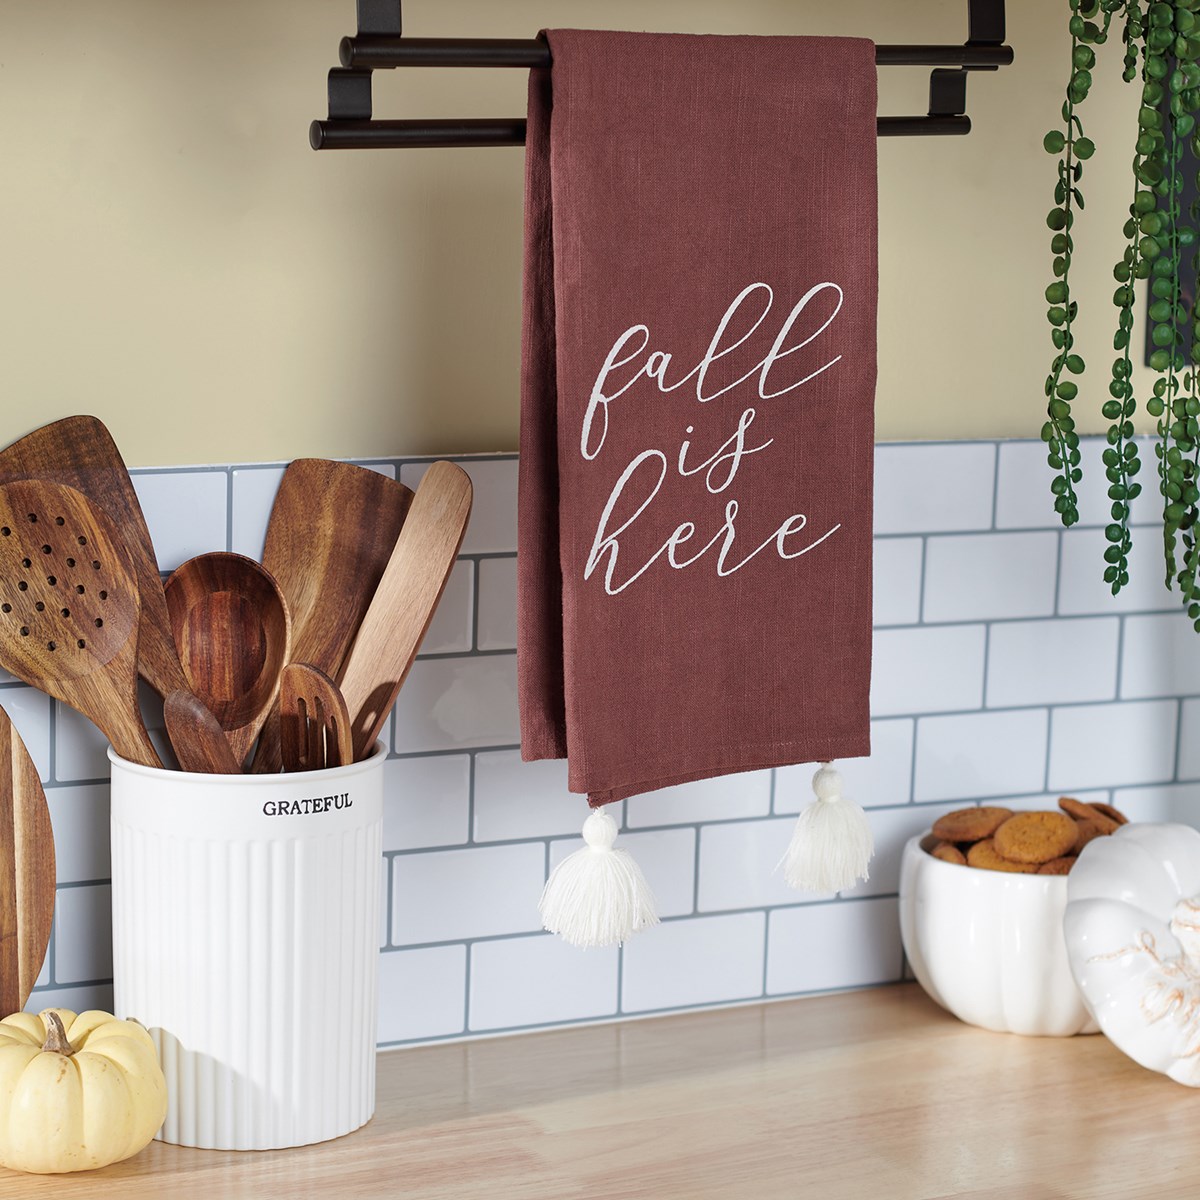 Fall Is Here Kitchen Towel - Cotton